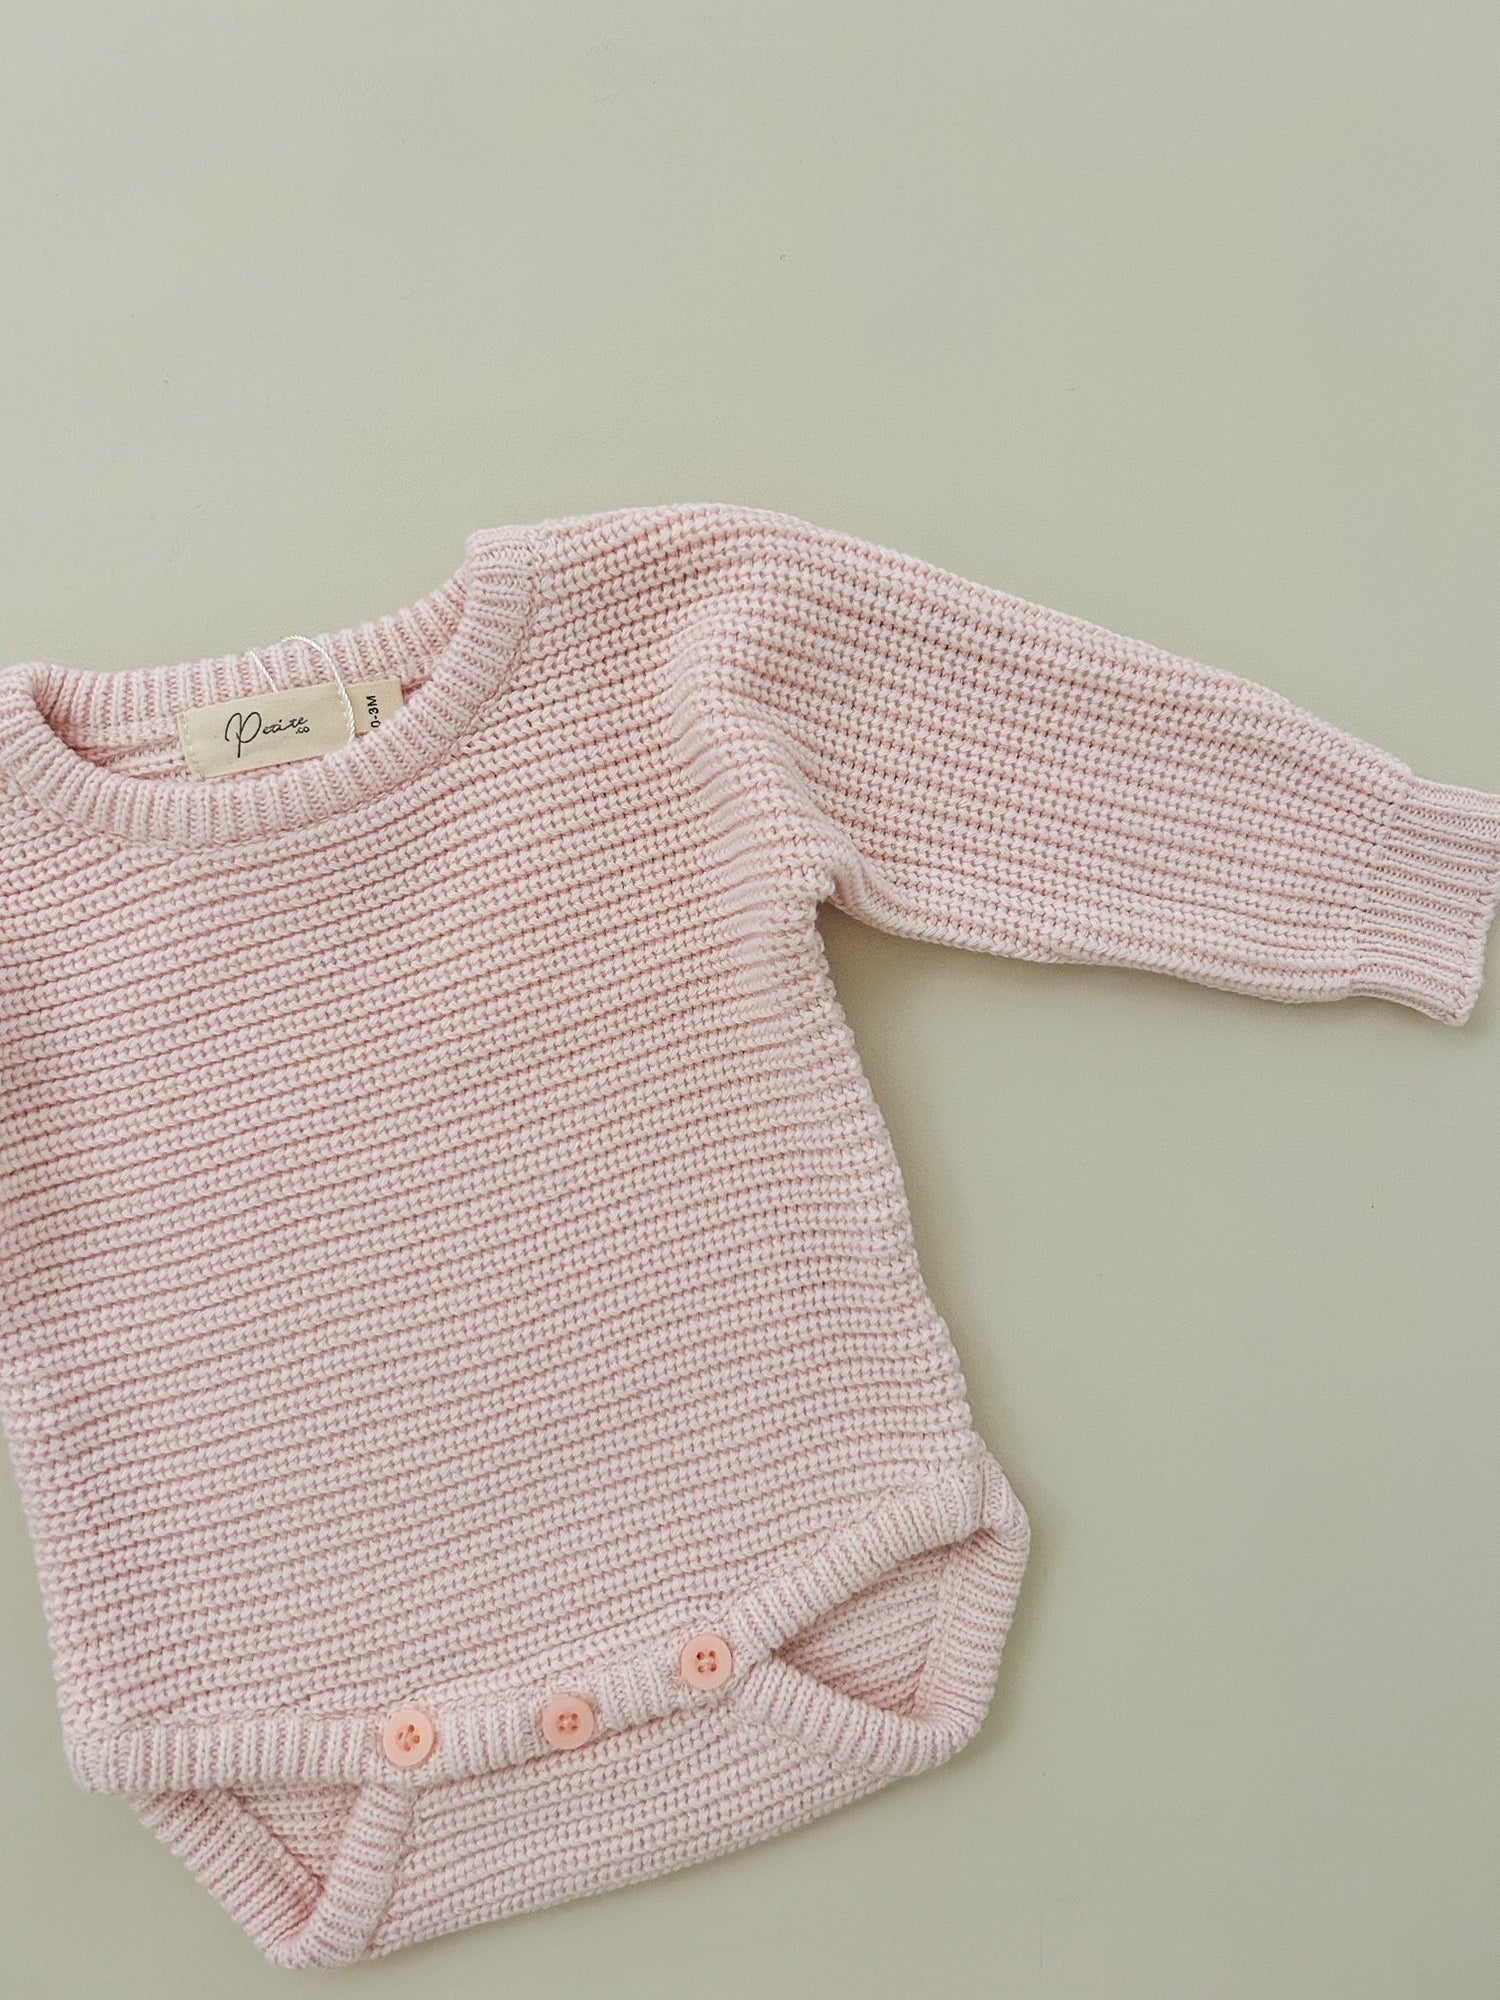 CLASSIC RIBBED ROMPER - BABY PINK | PERSONALISED EMBROIDERY AVAILABLE